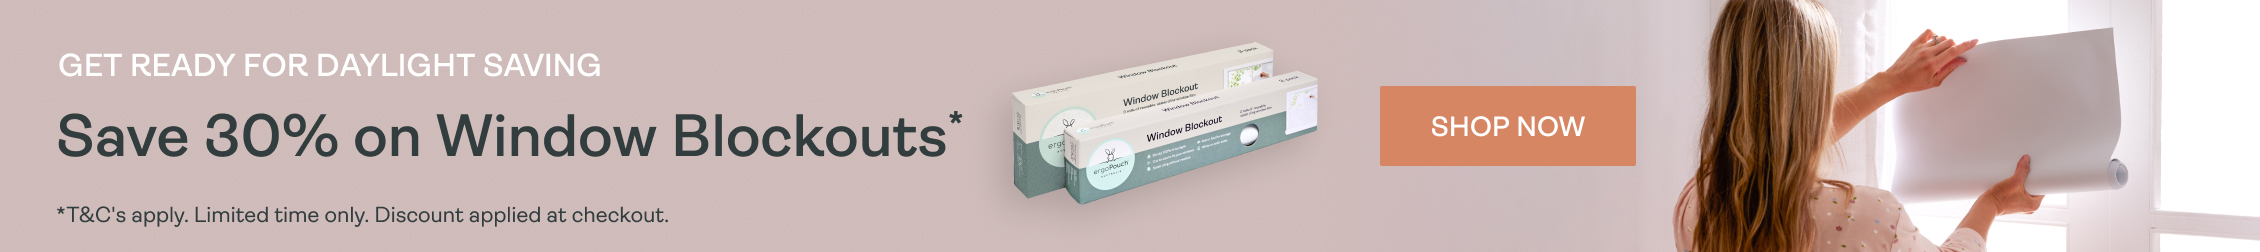 Get ready for daylight saving - Save 30% off window blockouts. Perfect blackout solution for babies and toddlers 